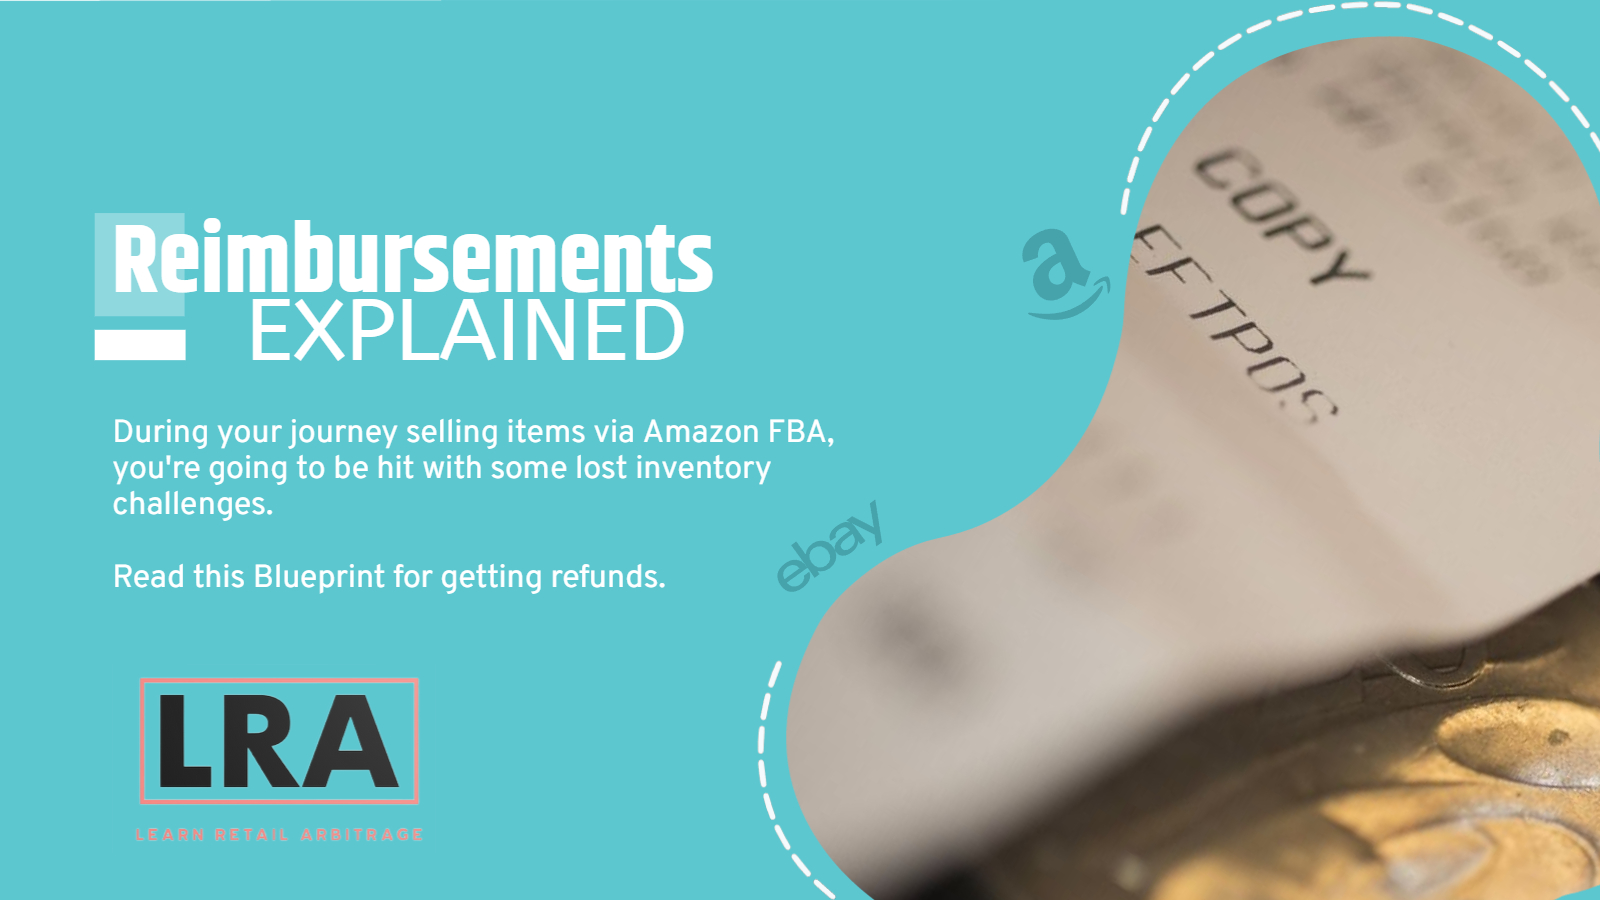 How to Get Reimbursed when Amazon Loses Your FBA Inventory